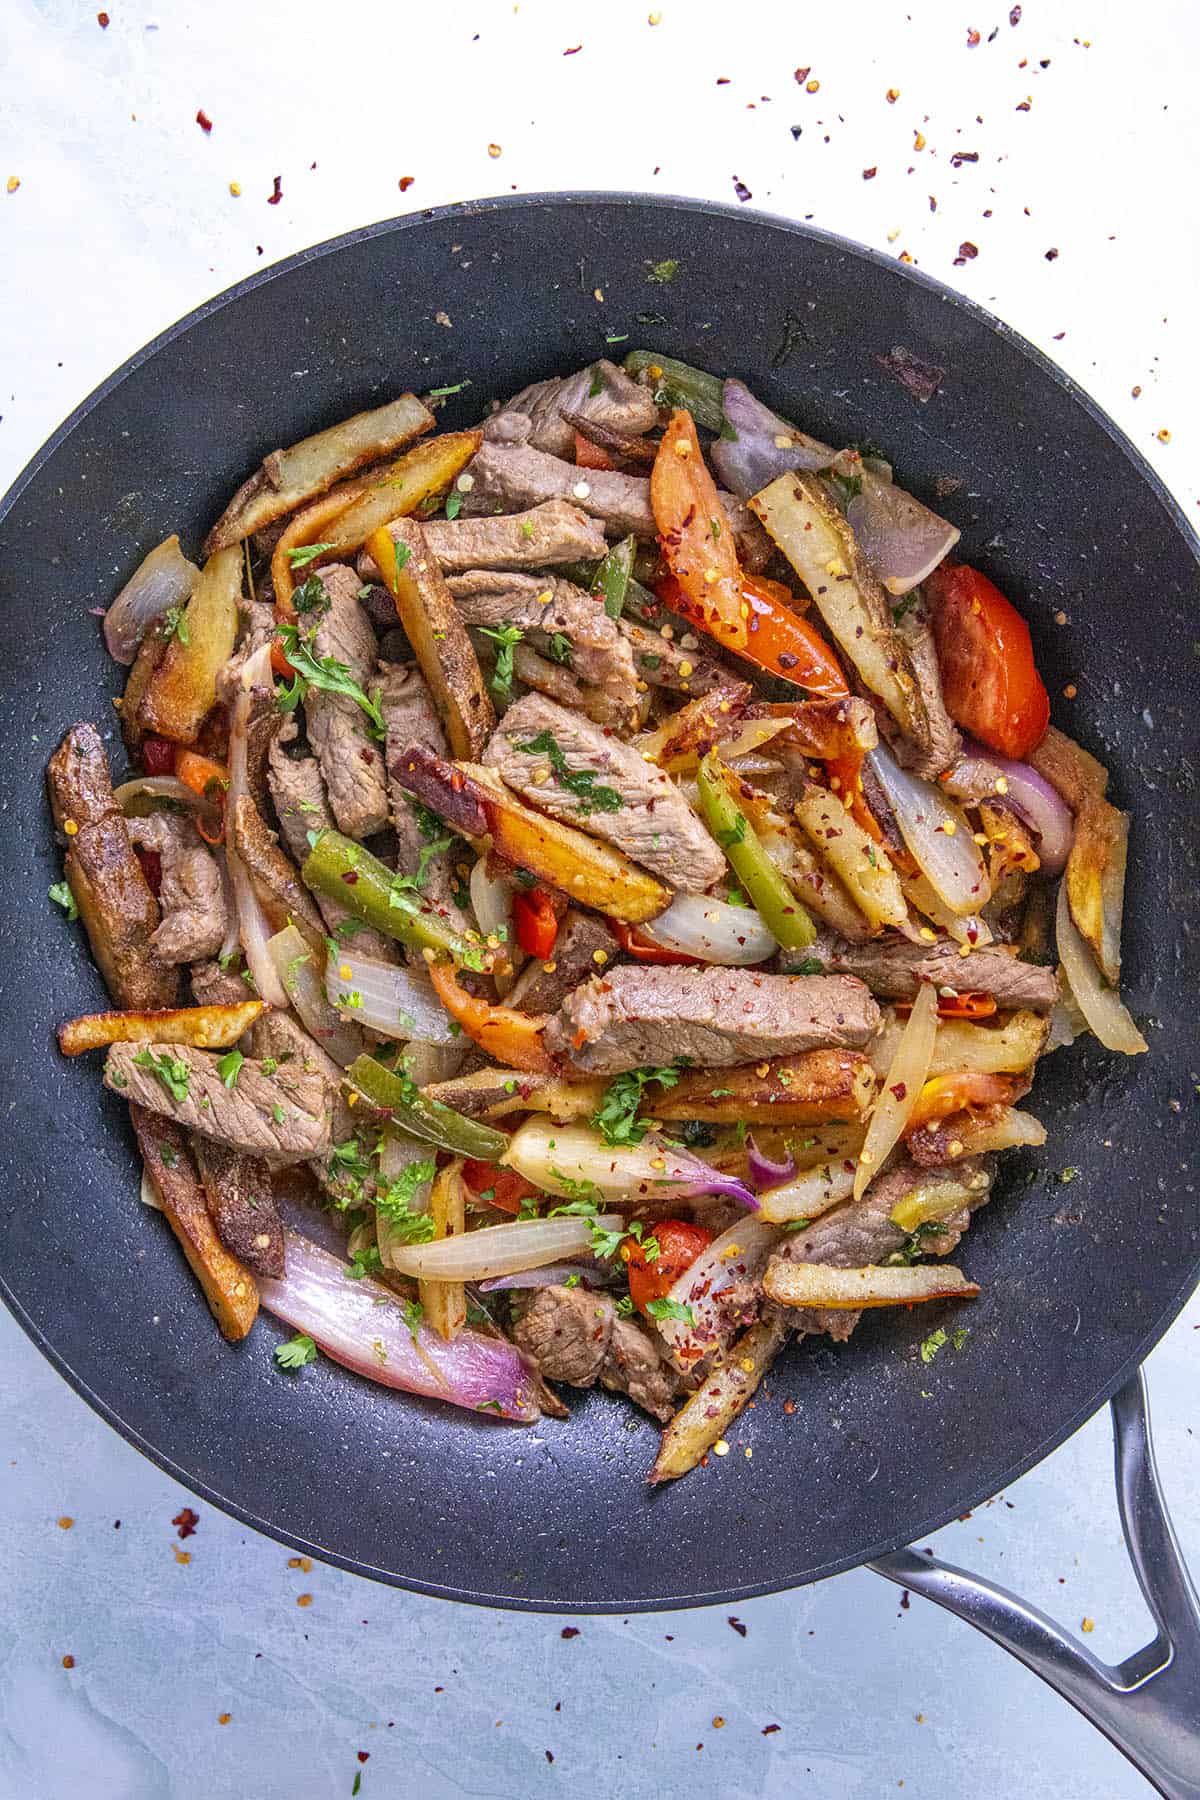 Peruvian Beef Stir Fry with French Fries (Lomo Saltado) in a pan, ready to serve